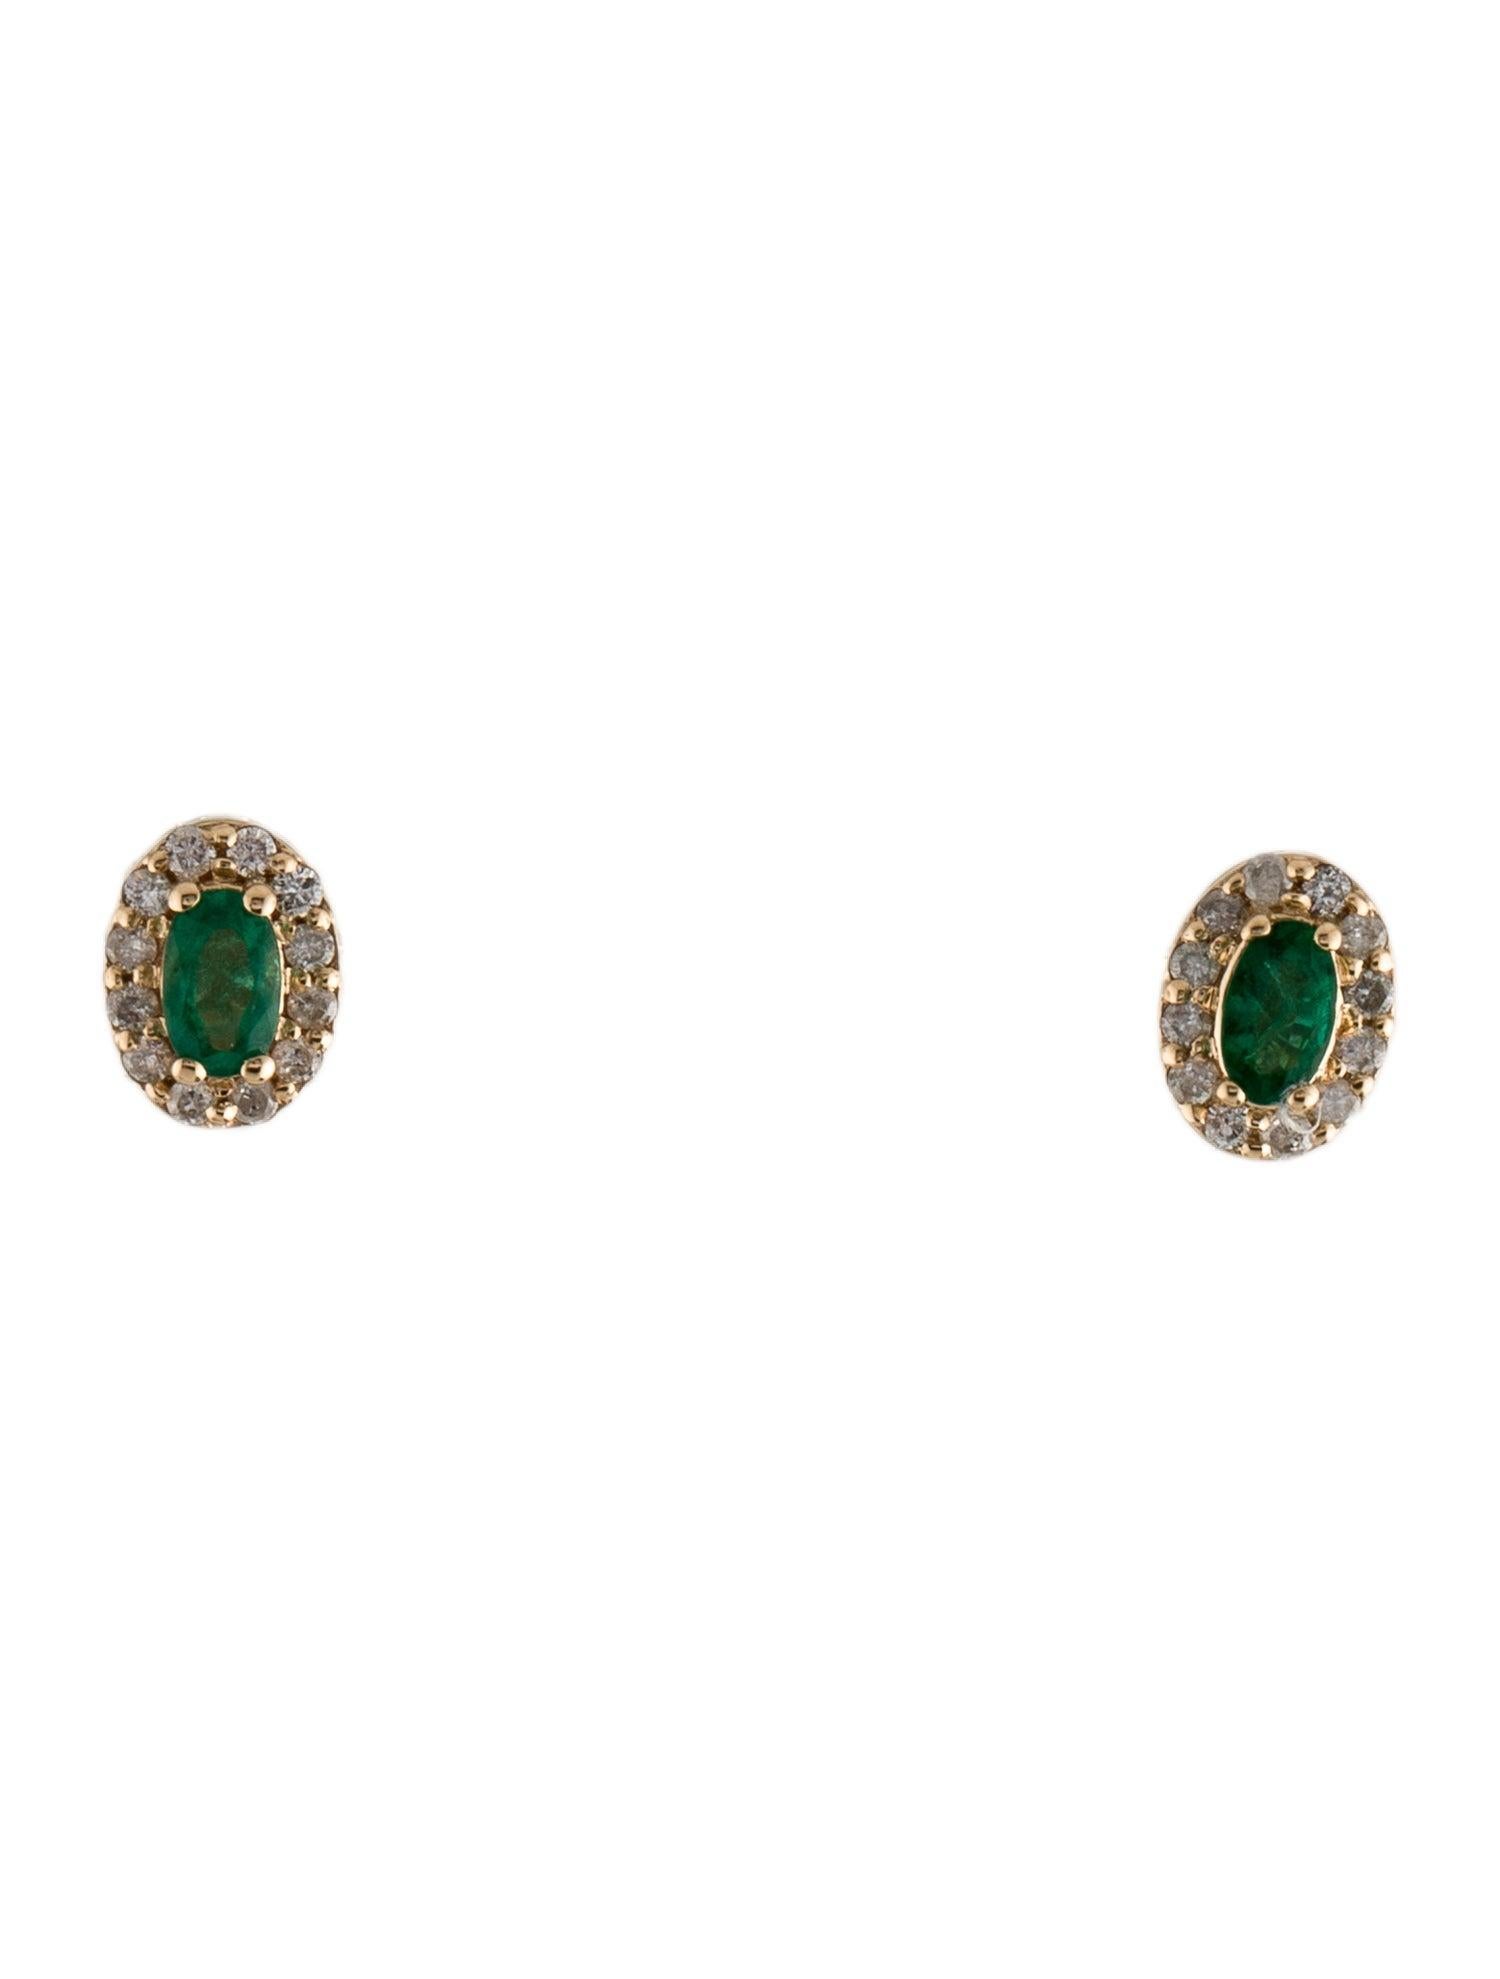 14K Emerald & Diamond Stud Earrings - Exquisite Gemstone Jewelry & Timeless In New Condition For Sale In Holtsville, NY